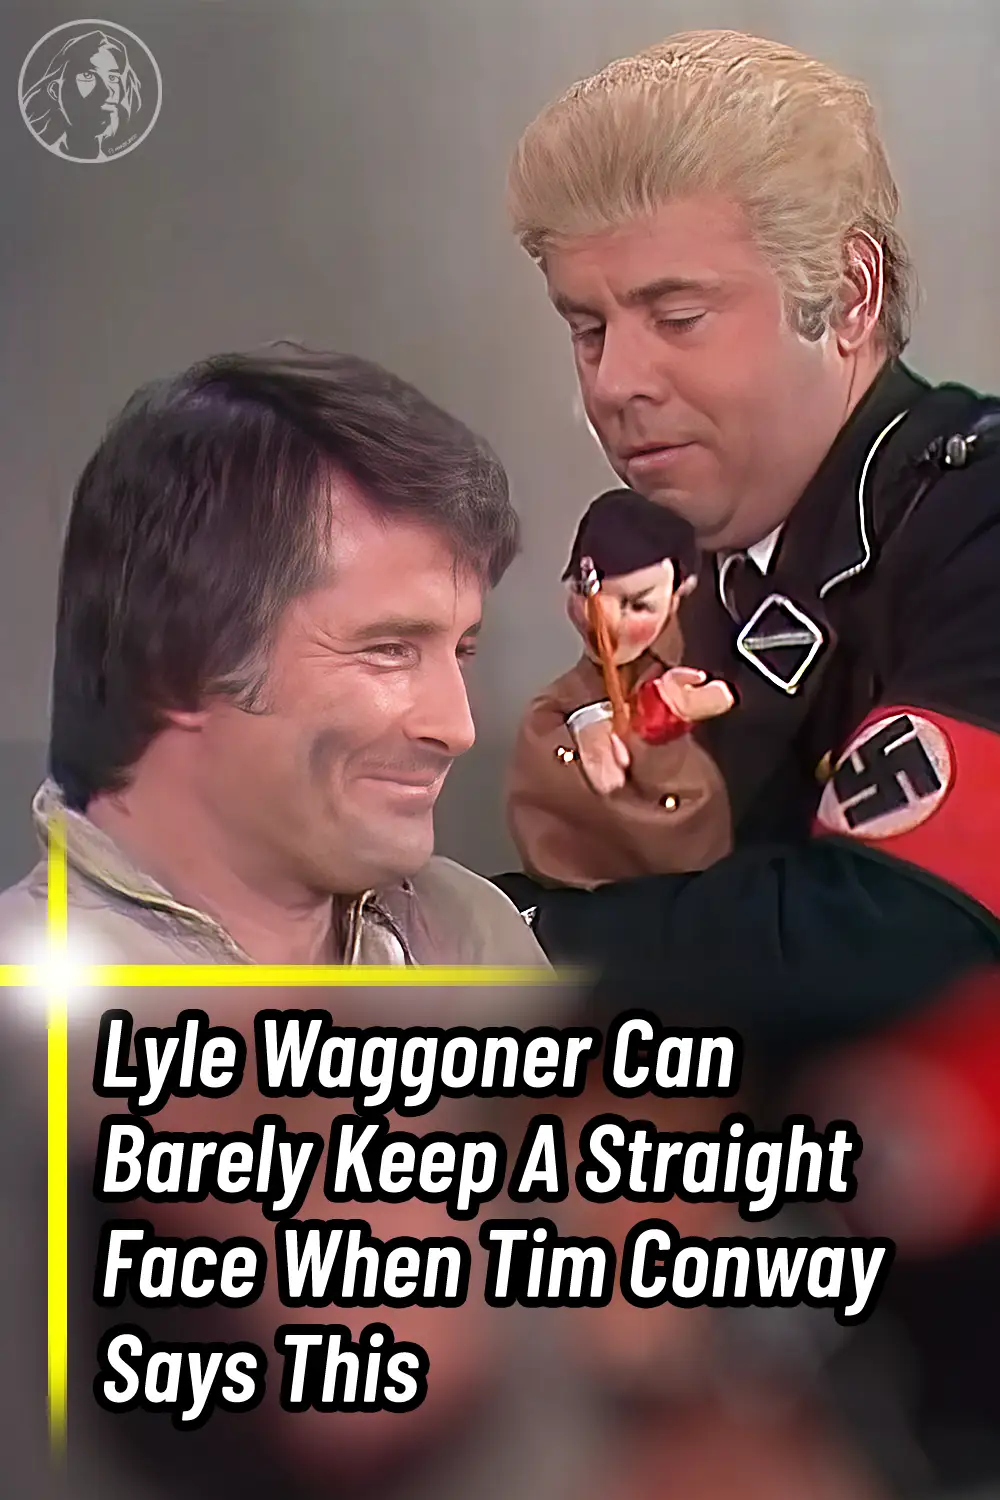 Lyle Waggoner Can Barely Keep A Straight Face When Tim Conway Says This